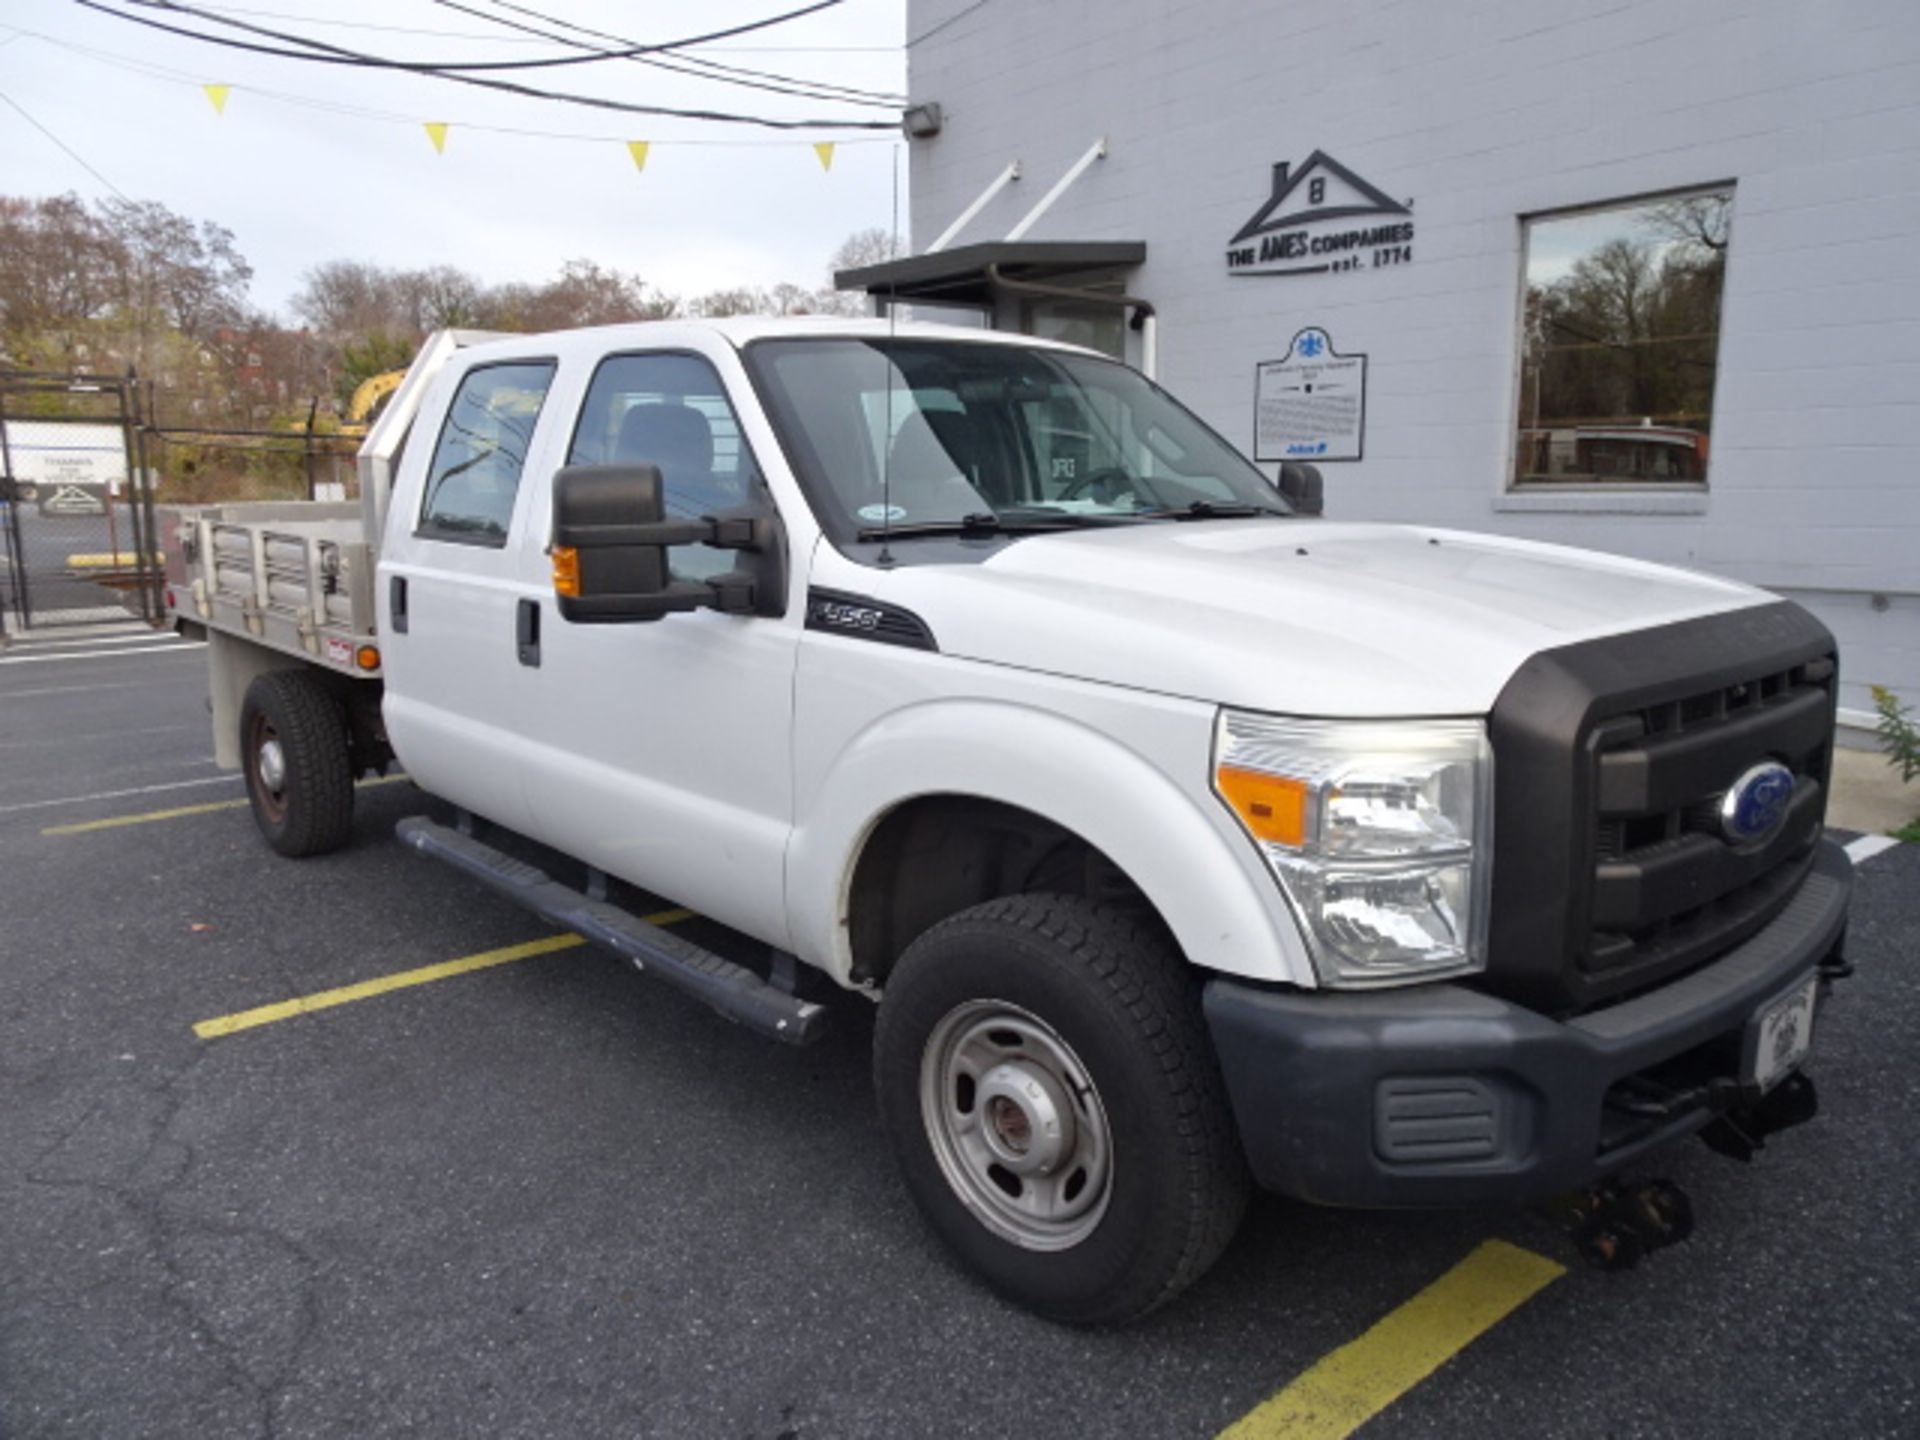 Ford F-350 Superduty Pickup Truck - Image 3 of 13